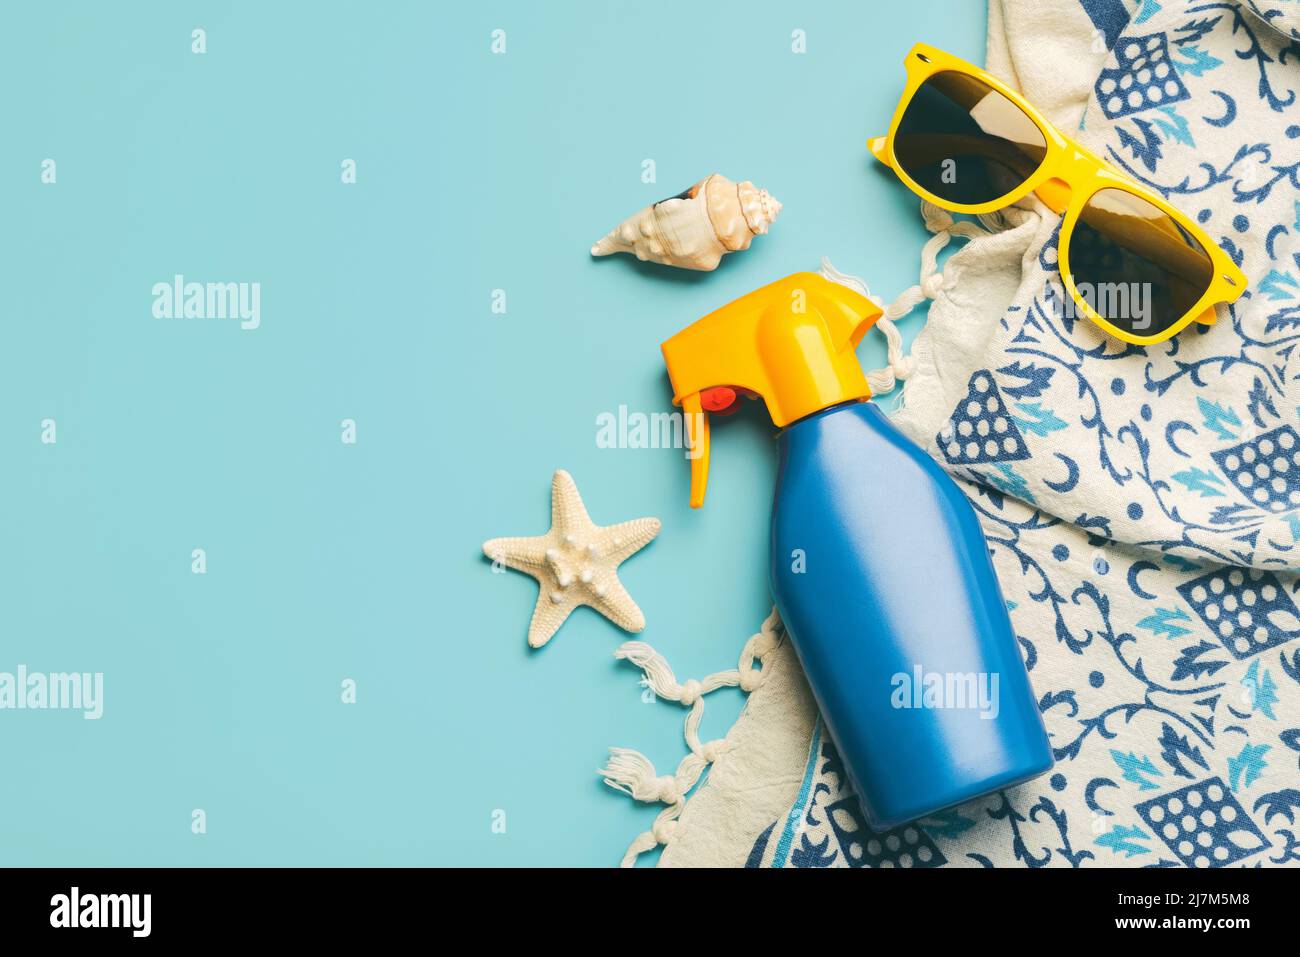 Summer holiday concept.Top view of beach towel,sunglasses and sunscreen with space for text over blue background Stock Photo